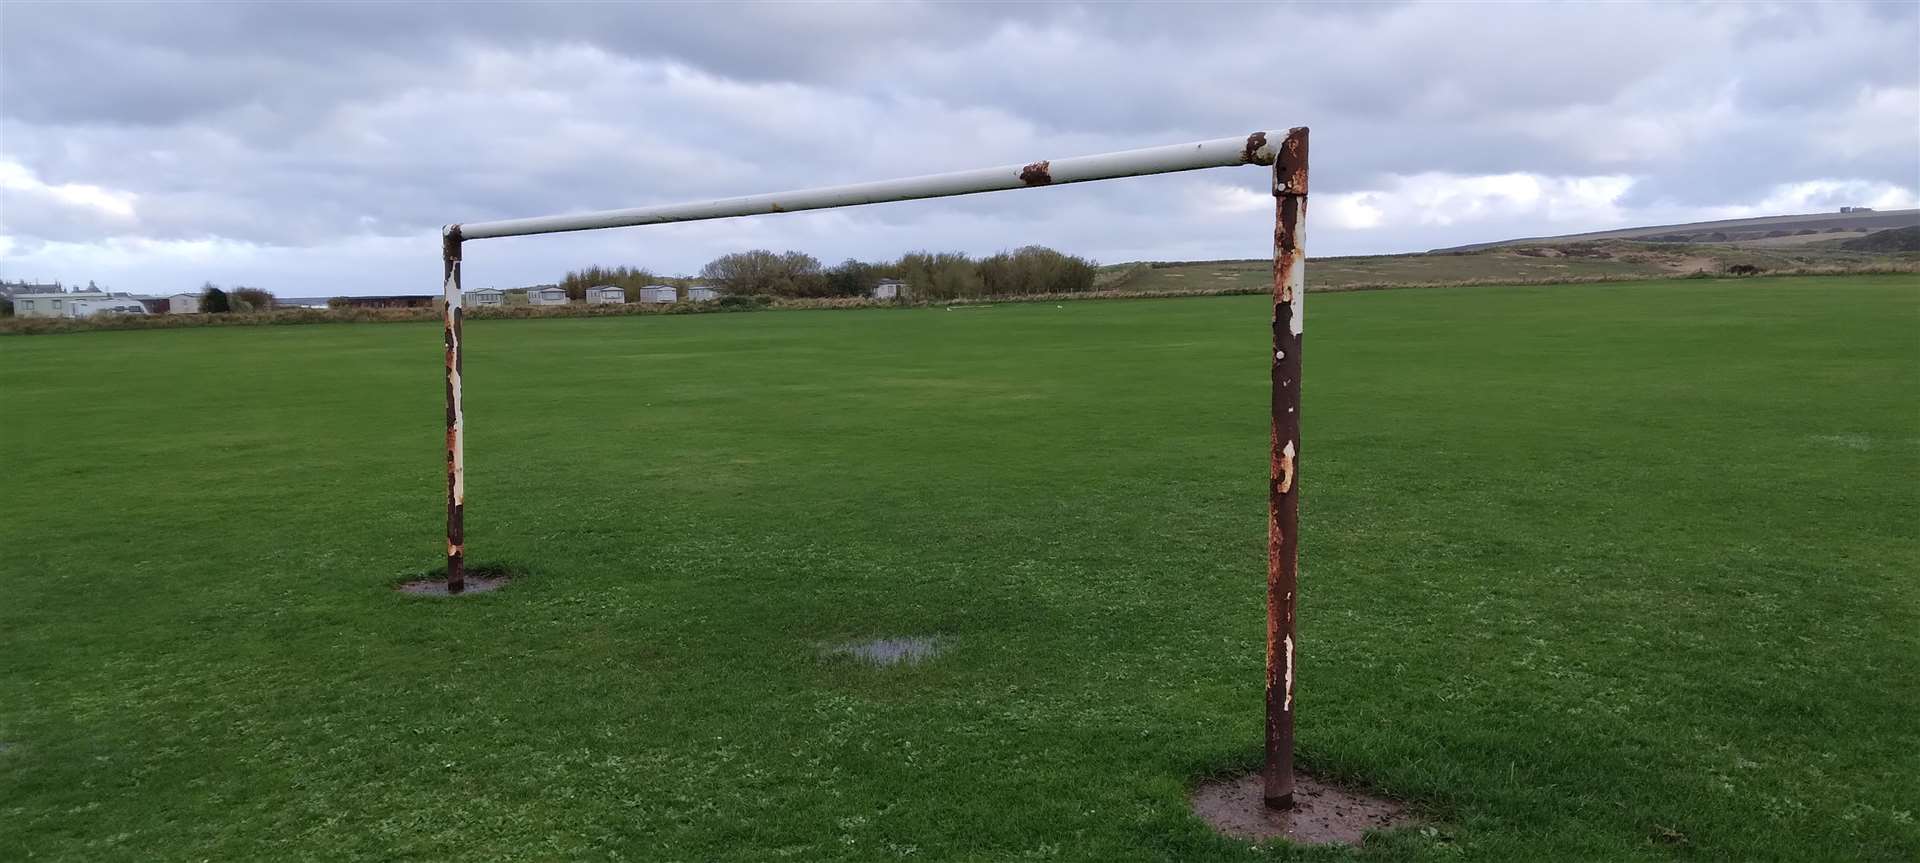 The funding for the Sandend Amenities Council will be used to make improvements to the village's playing field.